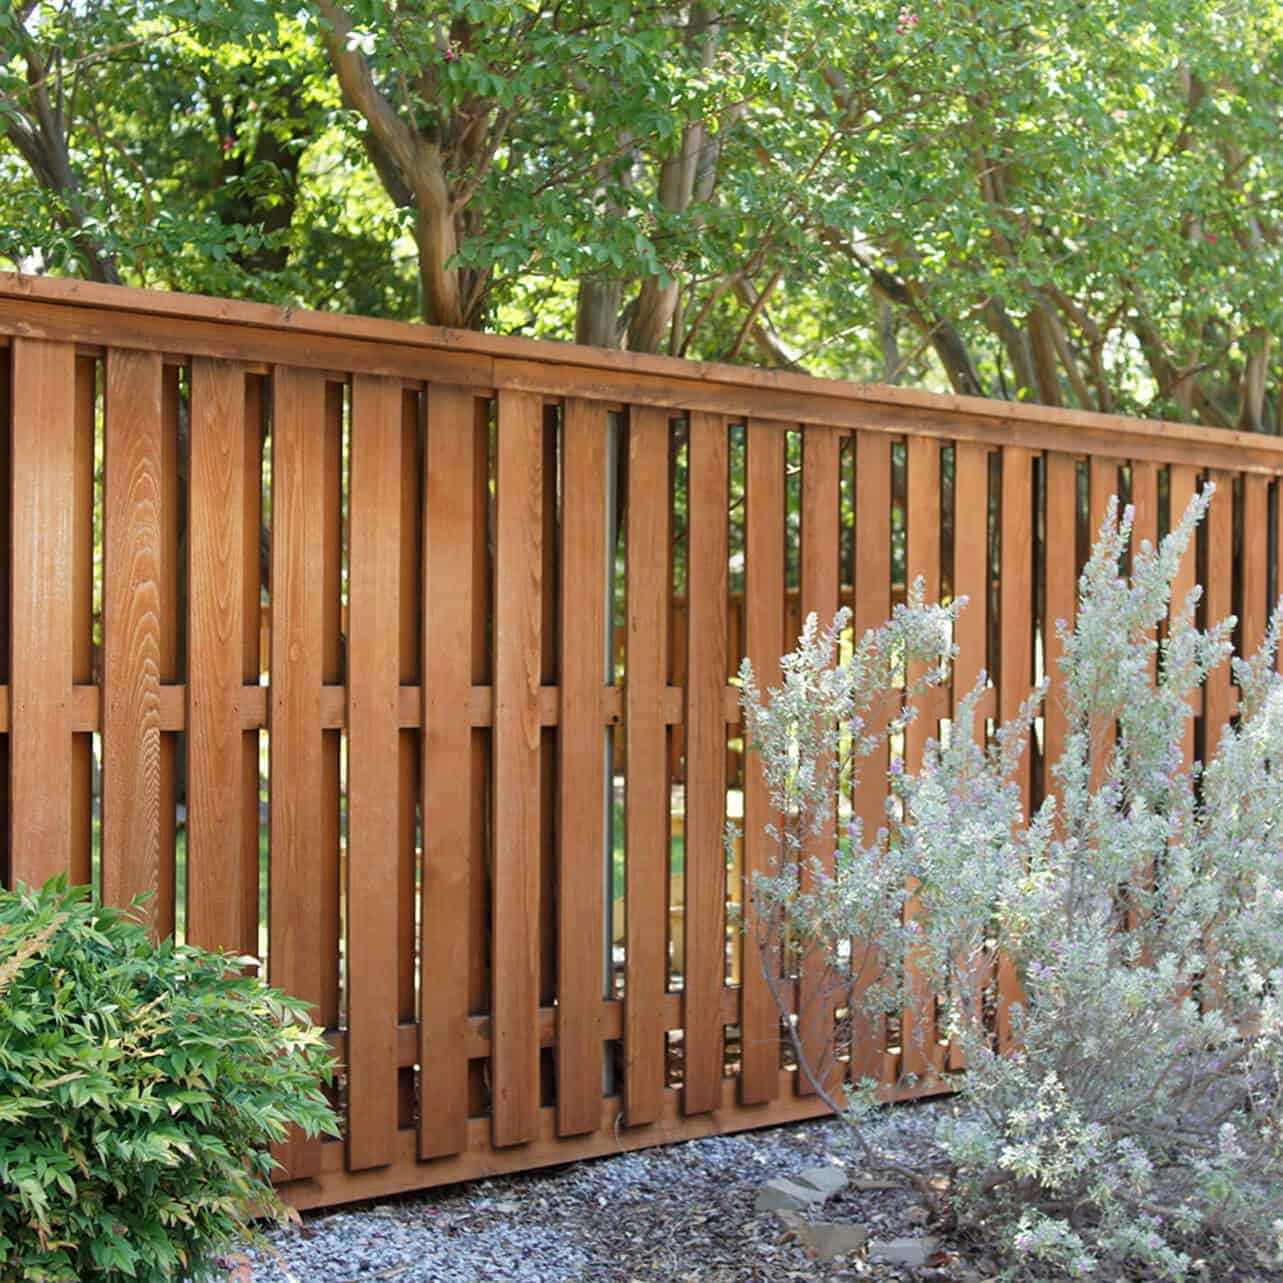 North Richland Hills Fence Company in TX